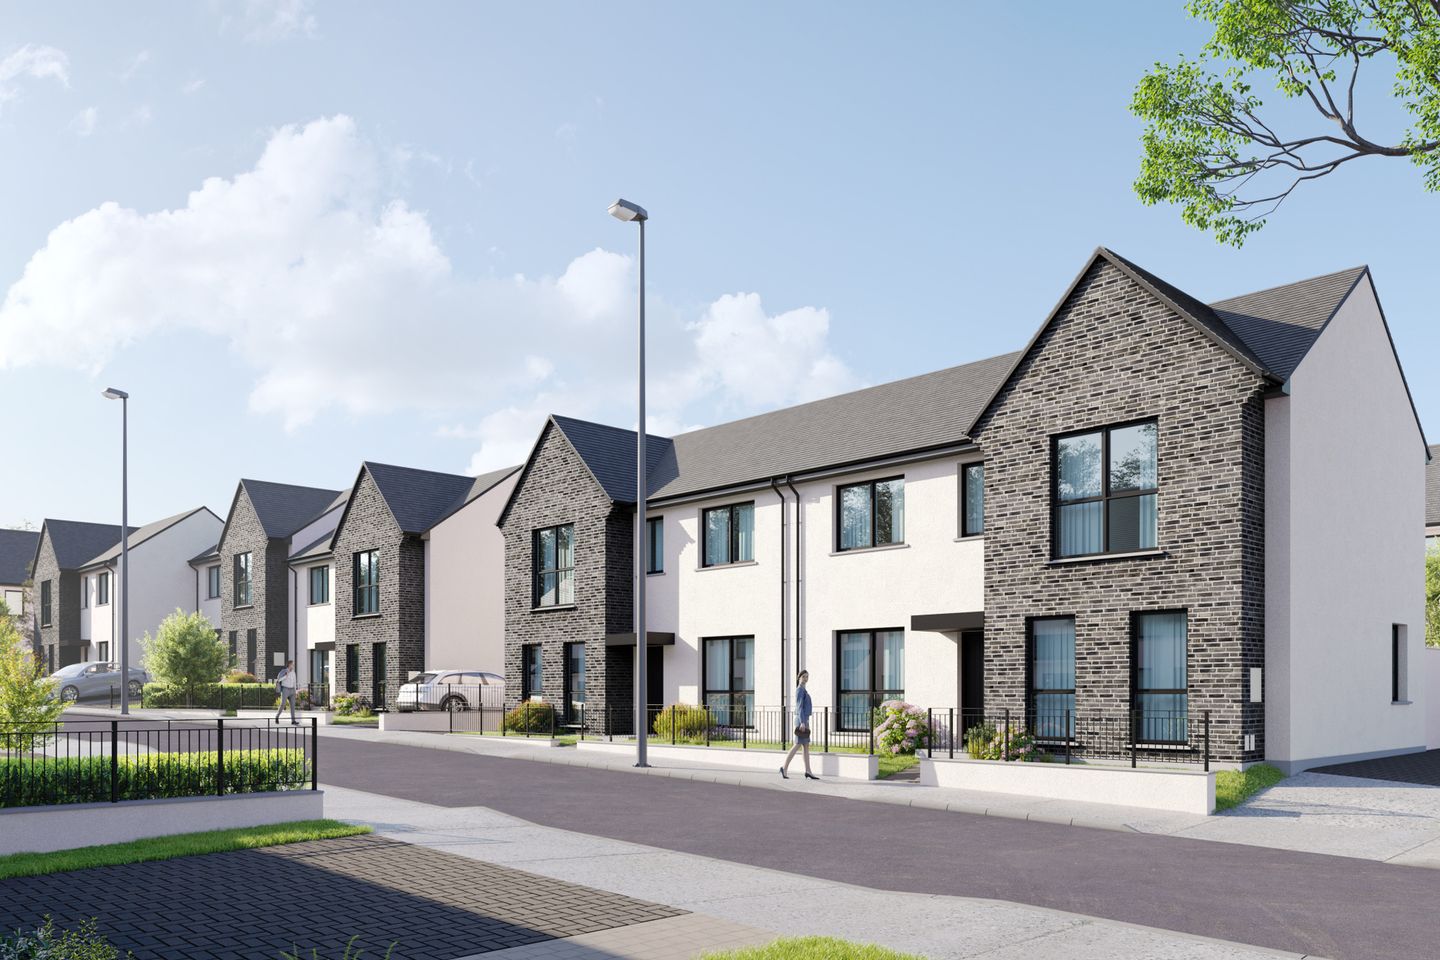 Two Bed Terraced, Lakeview, Two Bed Terraced, Lakeview, Castleredmond, Midleton, Co. Cork